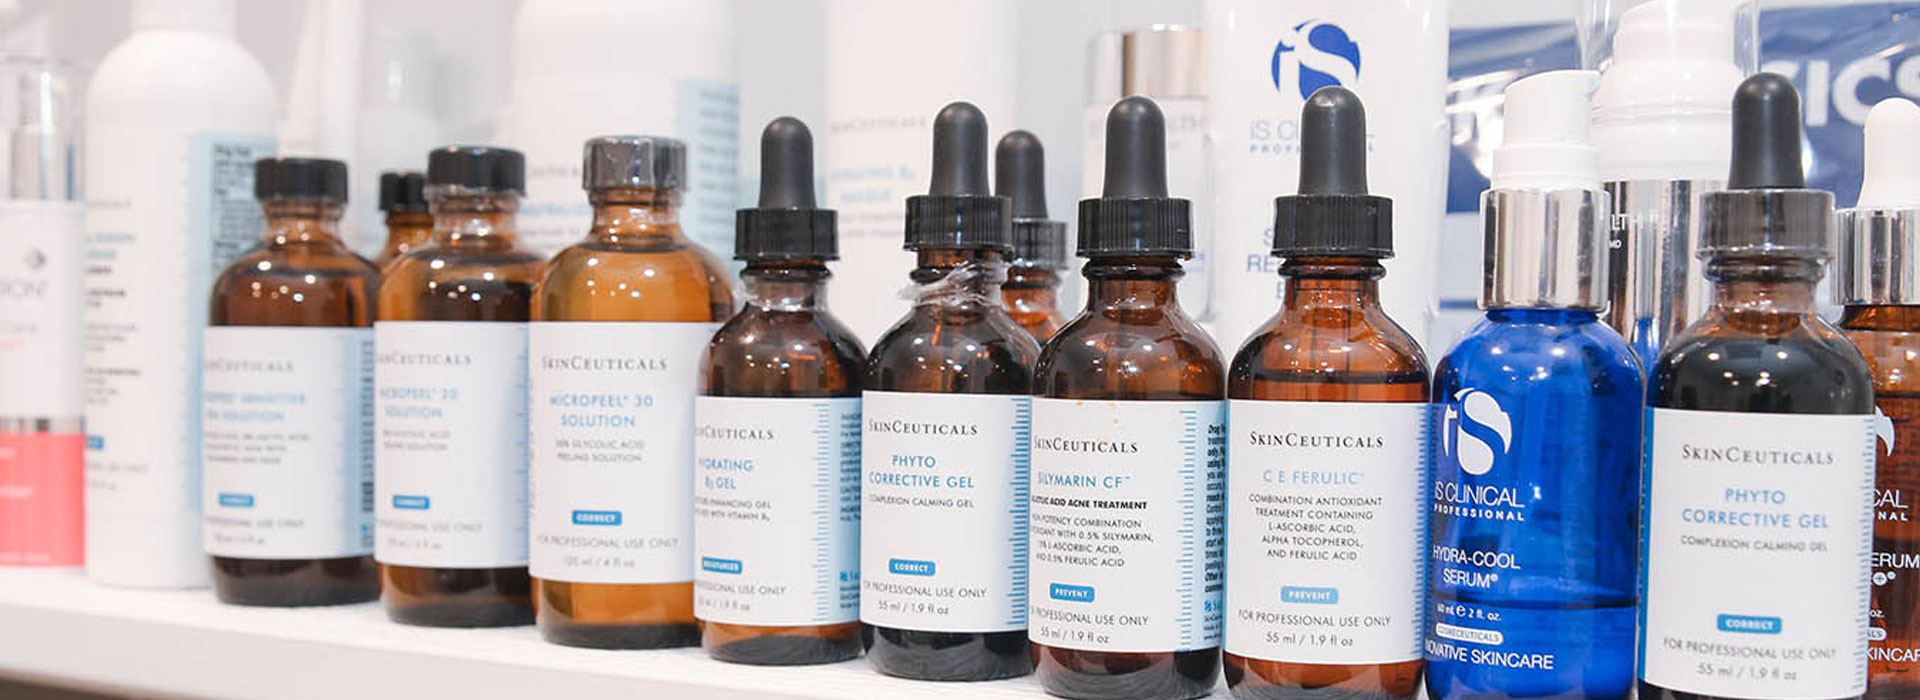 Collection of Skinceuticals brand skin product bottles.